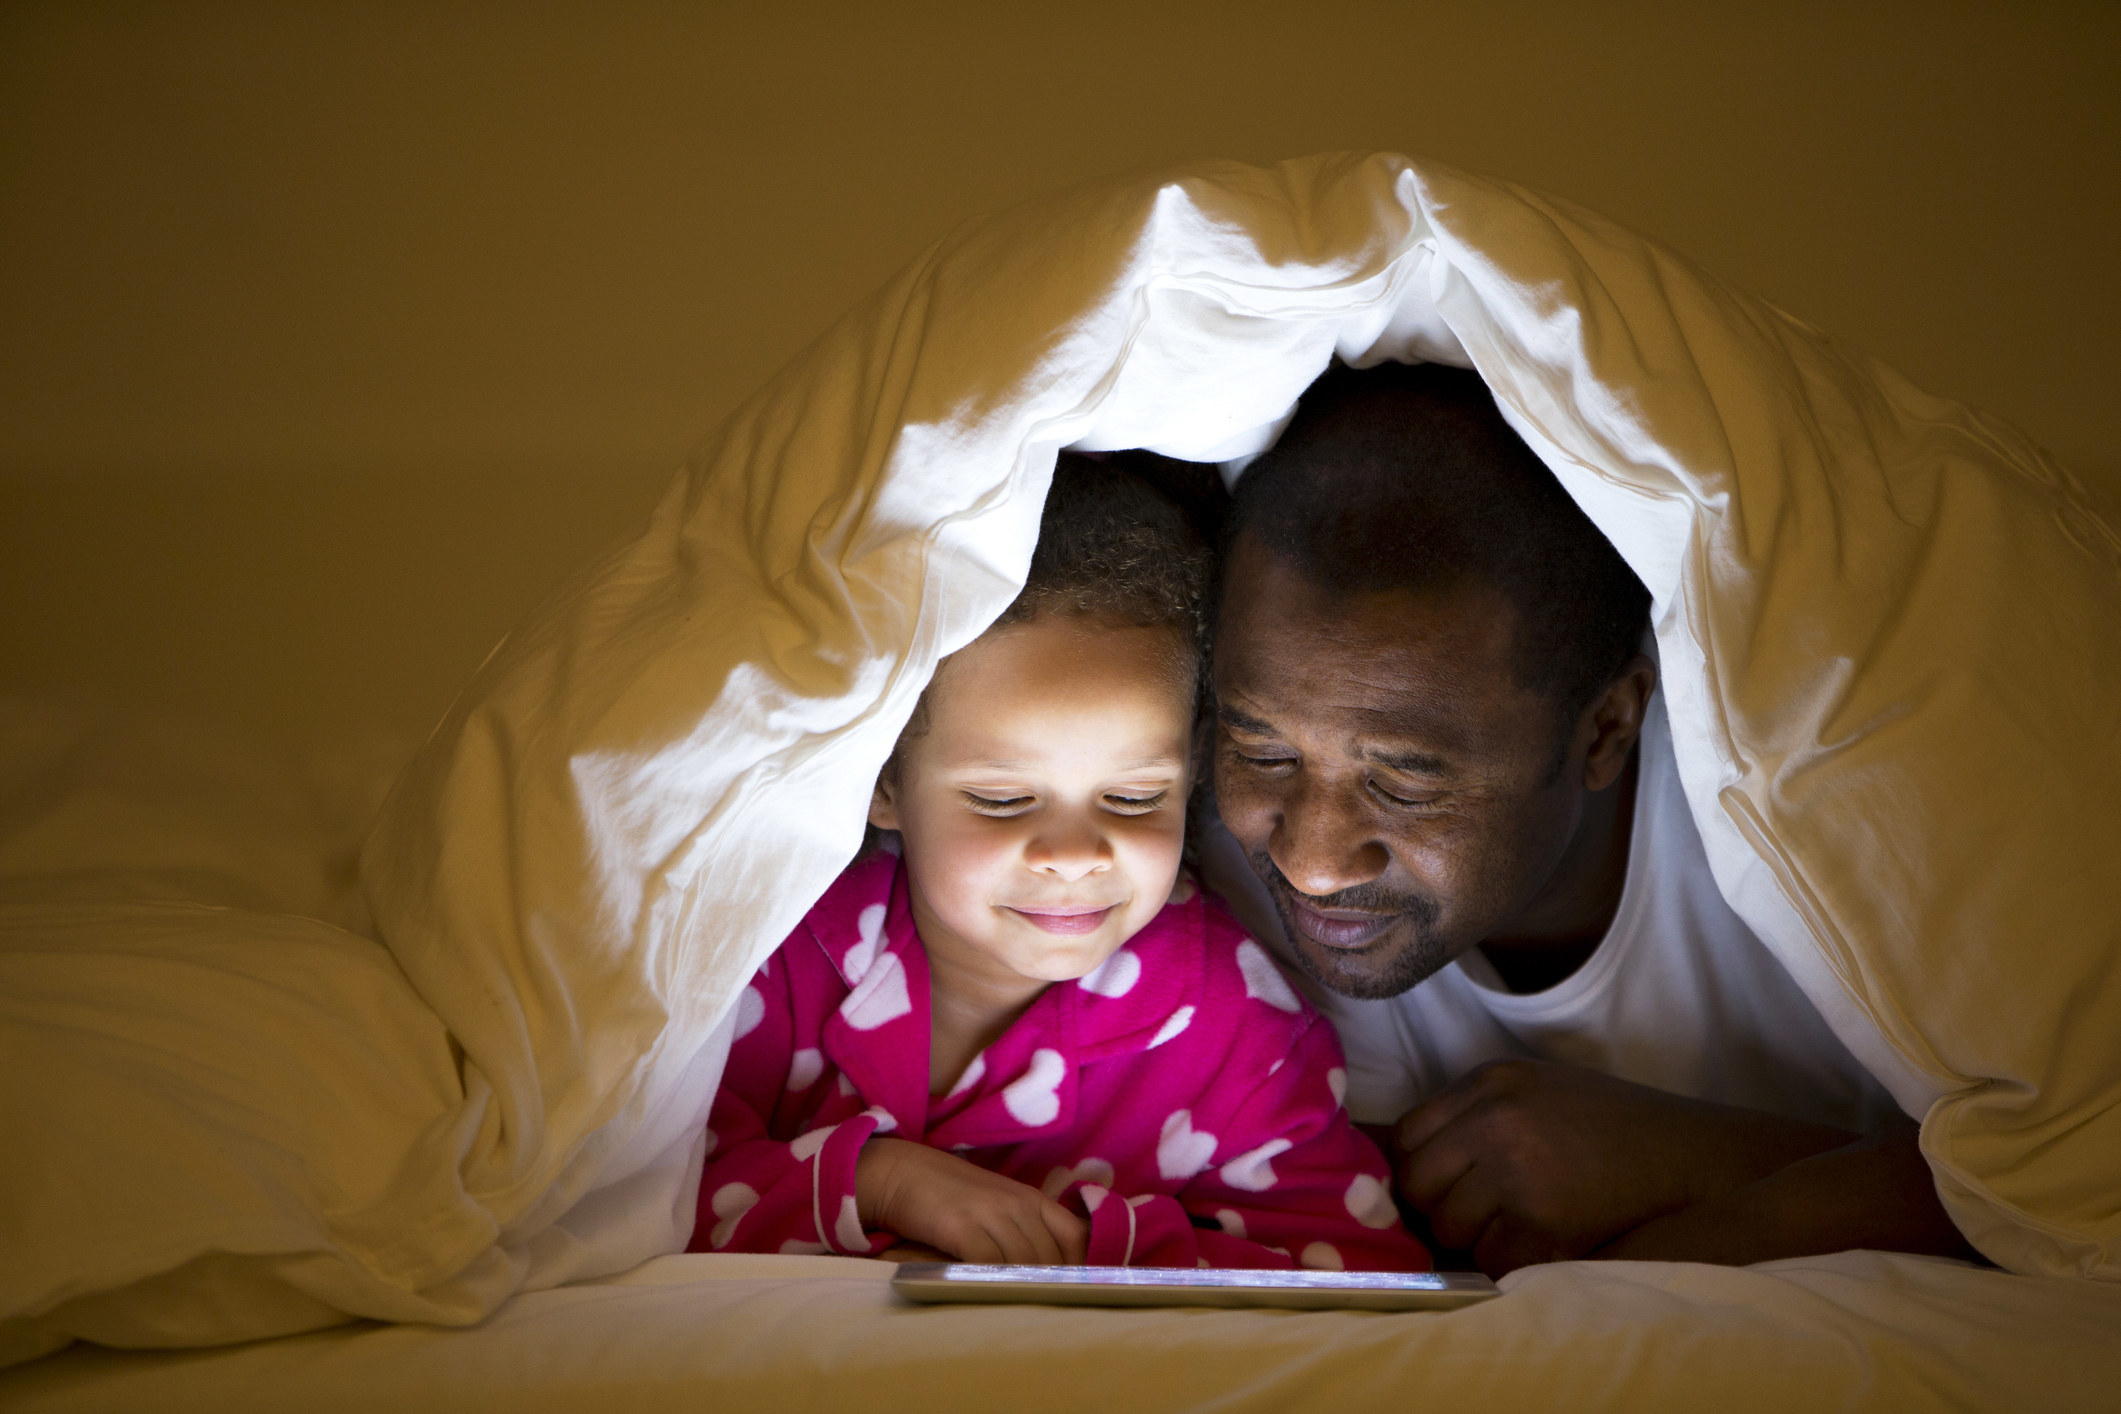 A father and son under the blankets using a tablet